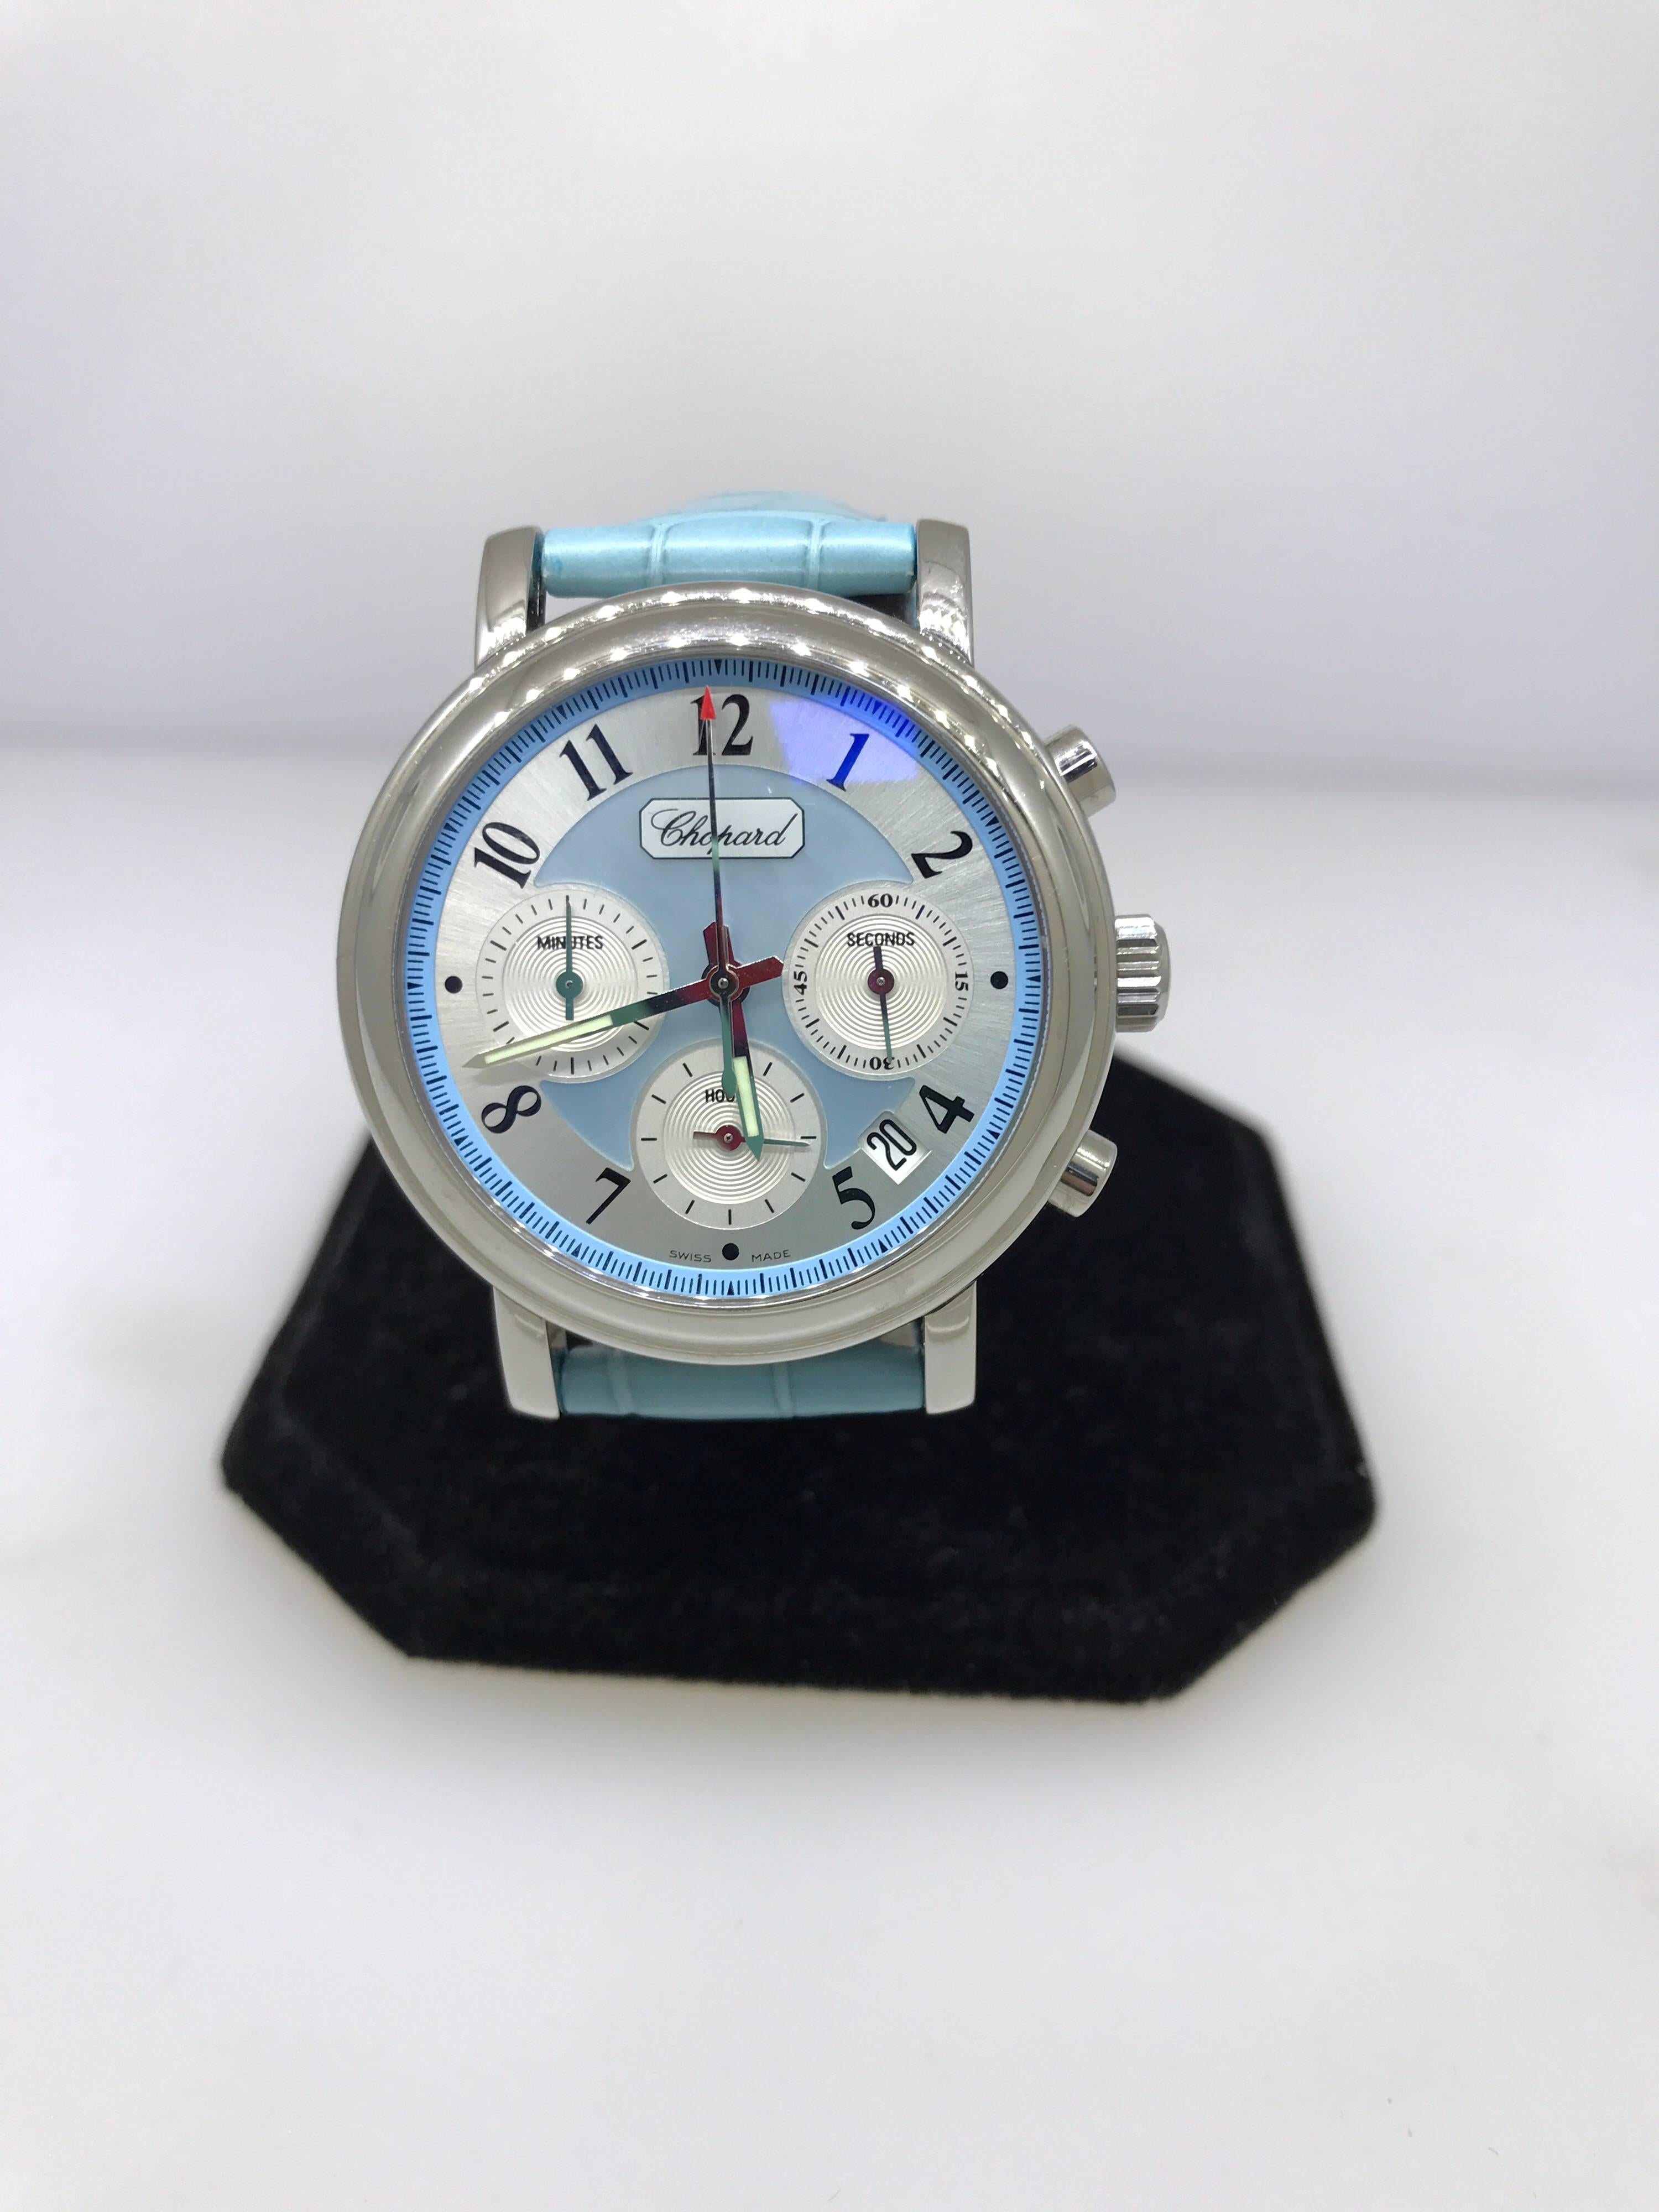 Chopard Mille Miglia Elton John Watch

Model Number 16/8331-3008

100% Authentic

New / Old Stock

Comes with instruction manual

Stainless Steel Case

Sapphire Crystal

Mother of Pearl and Light Blue Dial

Case Diameter: 38.5mm

Light Blue